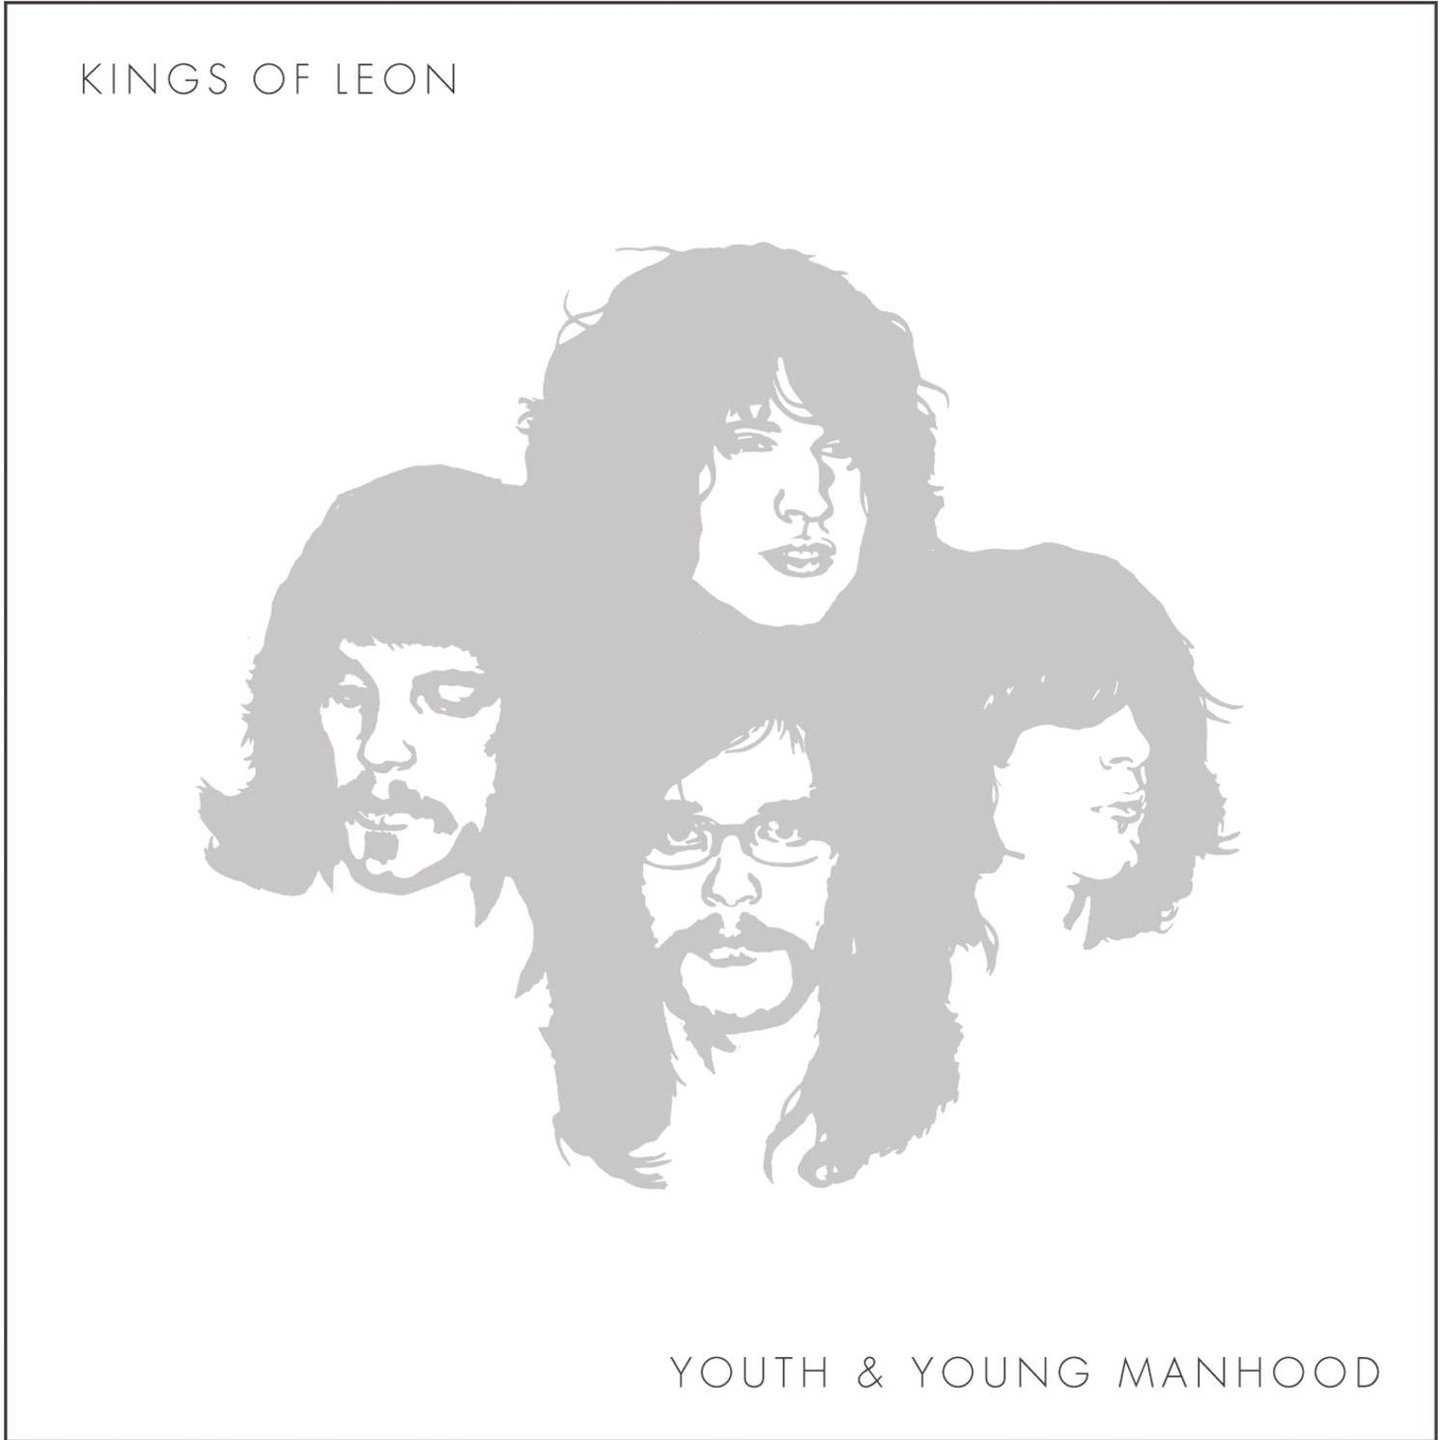 KINGS OF LEON - Youth & Young Manhood 2xLP